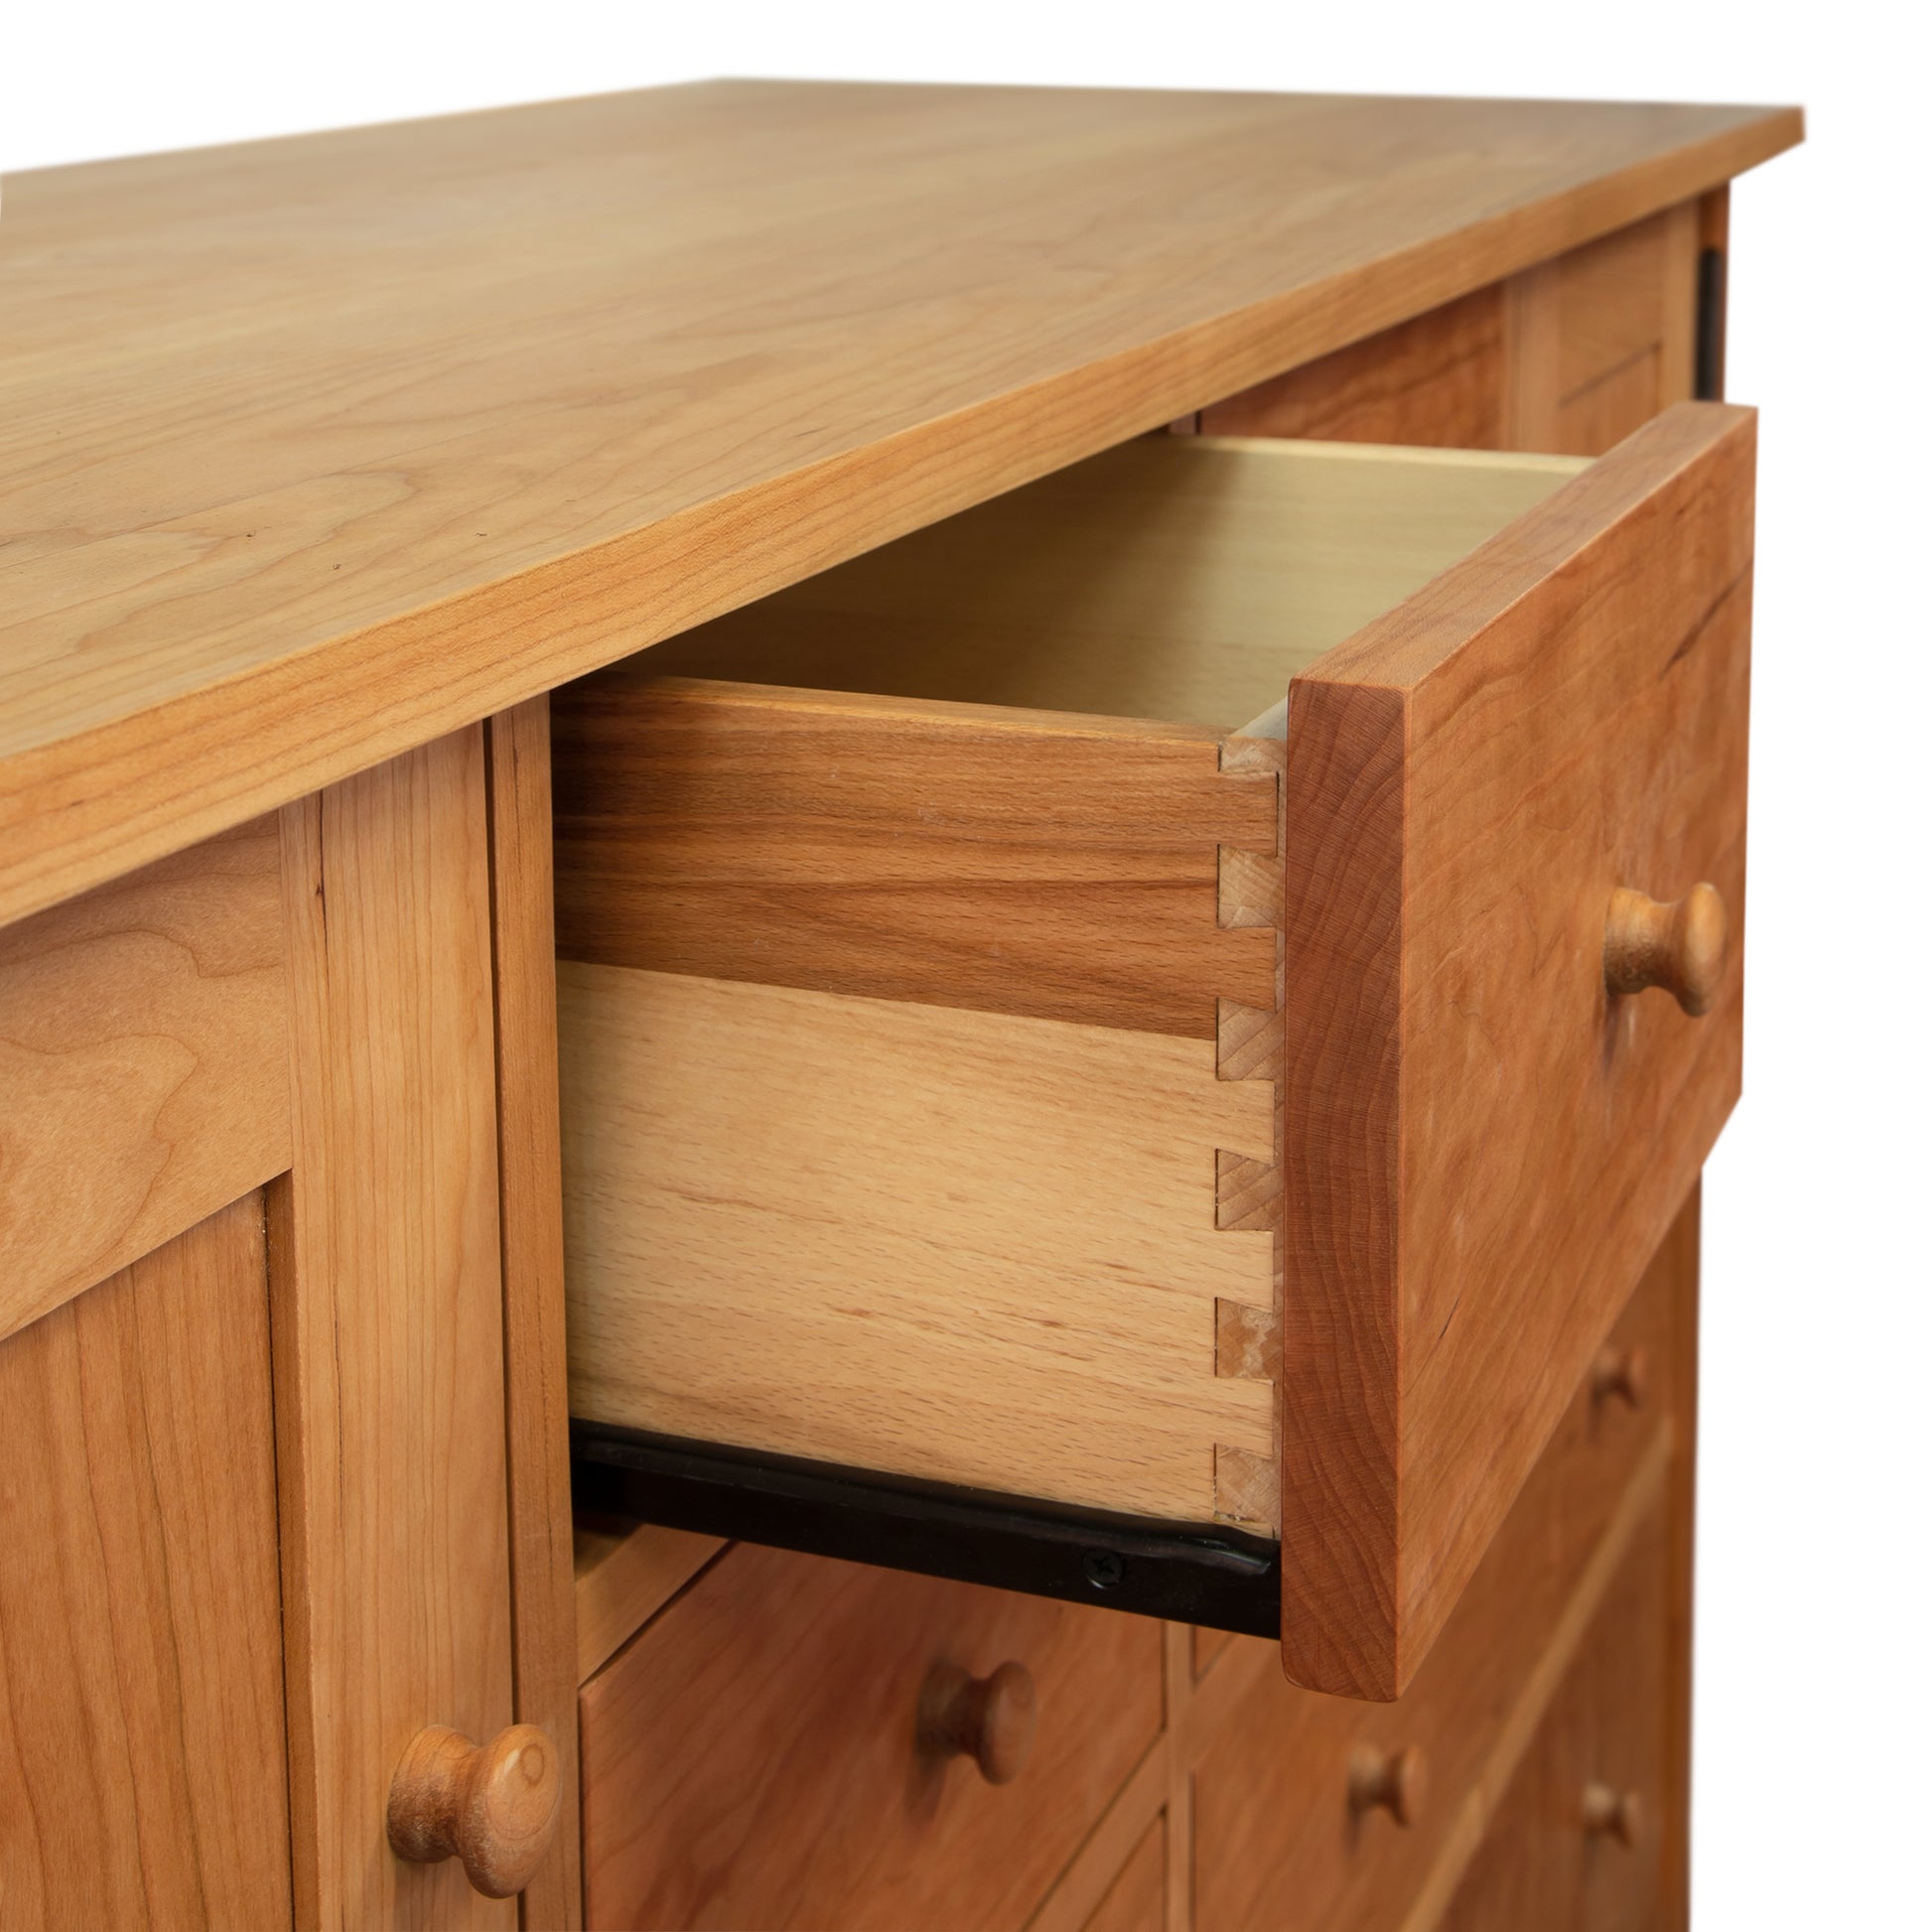 A luxury wooden dresser with two drawers, designed in the Burlington Shaker style - The Burlington Shaker 8-Drawer 2-Door Dresser, designed by Vermont Furniture Designs.